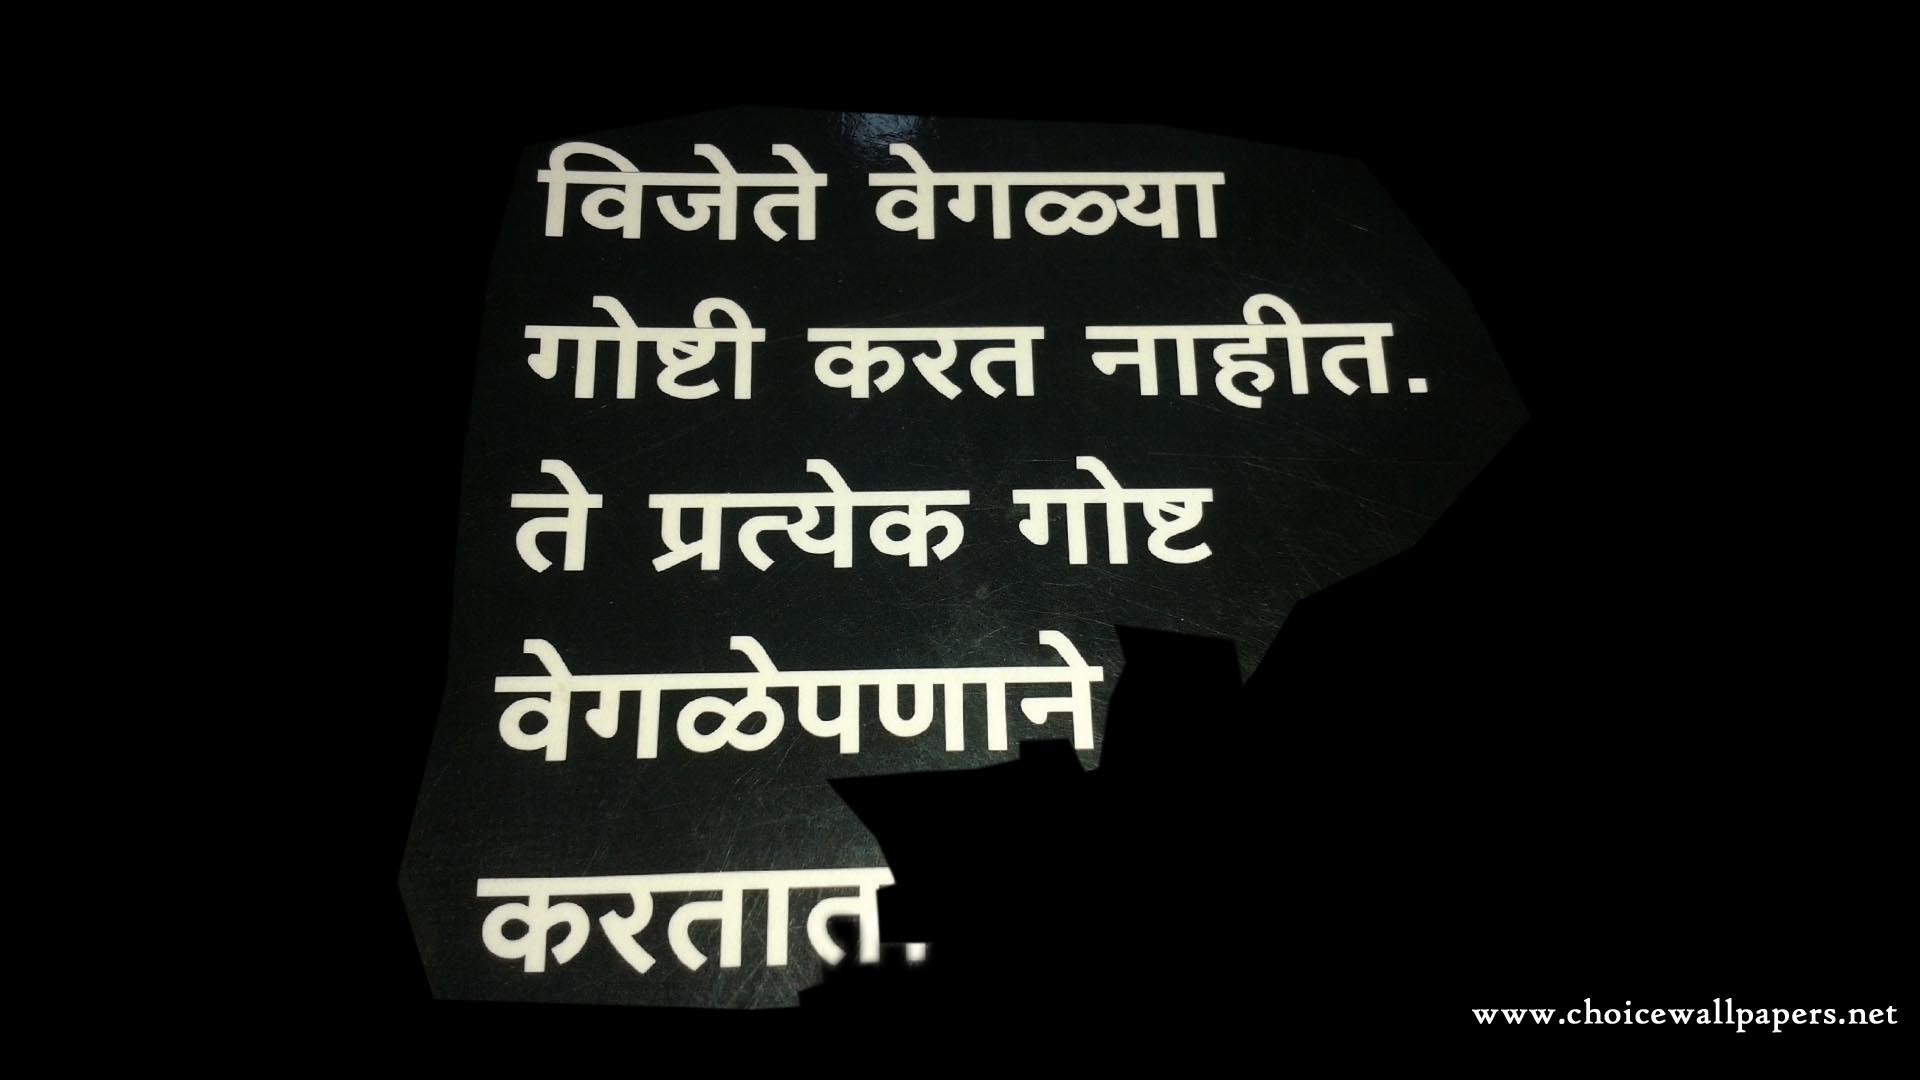 1920x1080 Marathi Quotes On True Love Download Marathi Wallpaper With Quotes Gallery